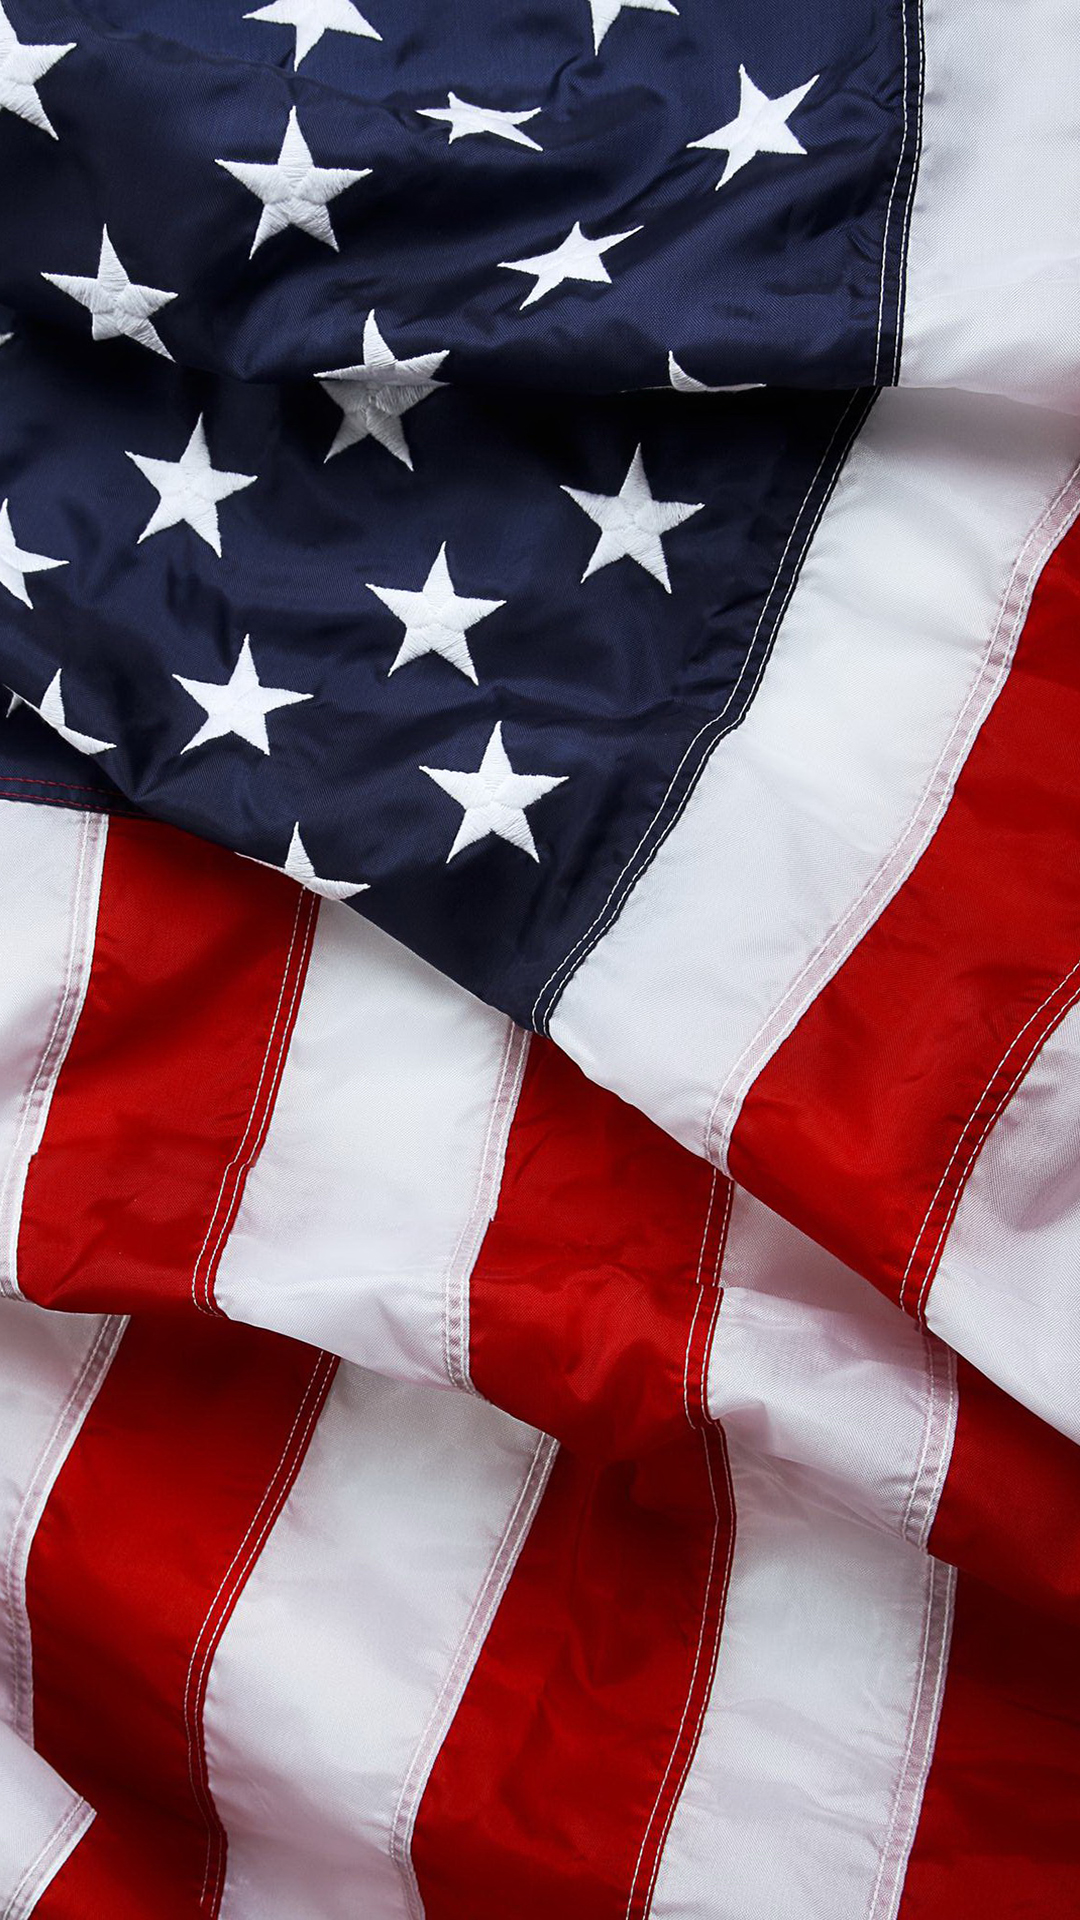 American Flag htc one wallpaper - Best htc one wallpapers, free ...